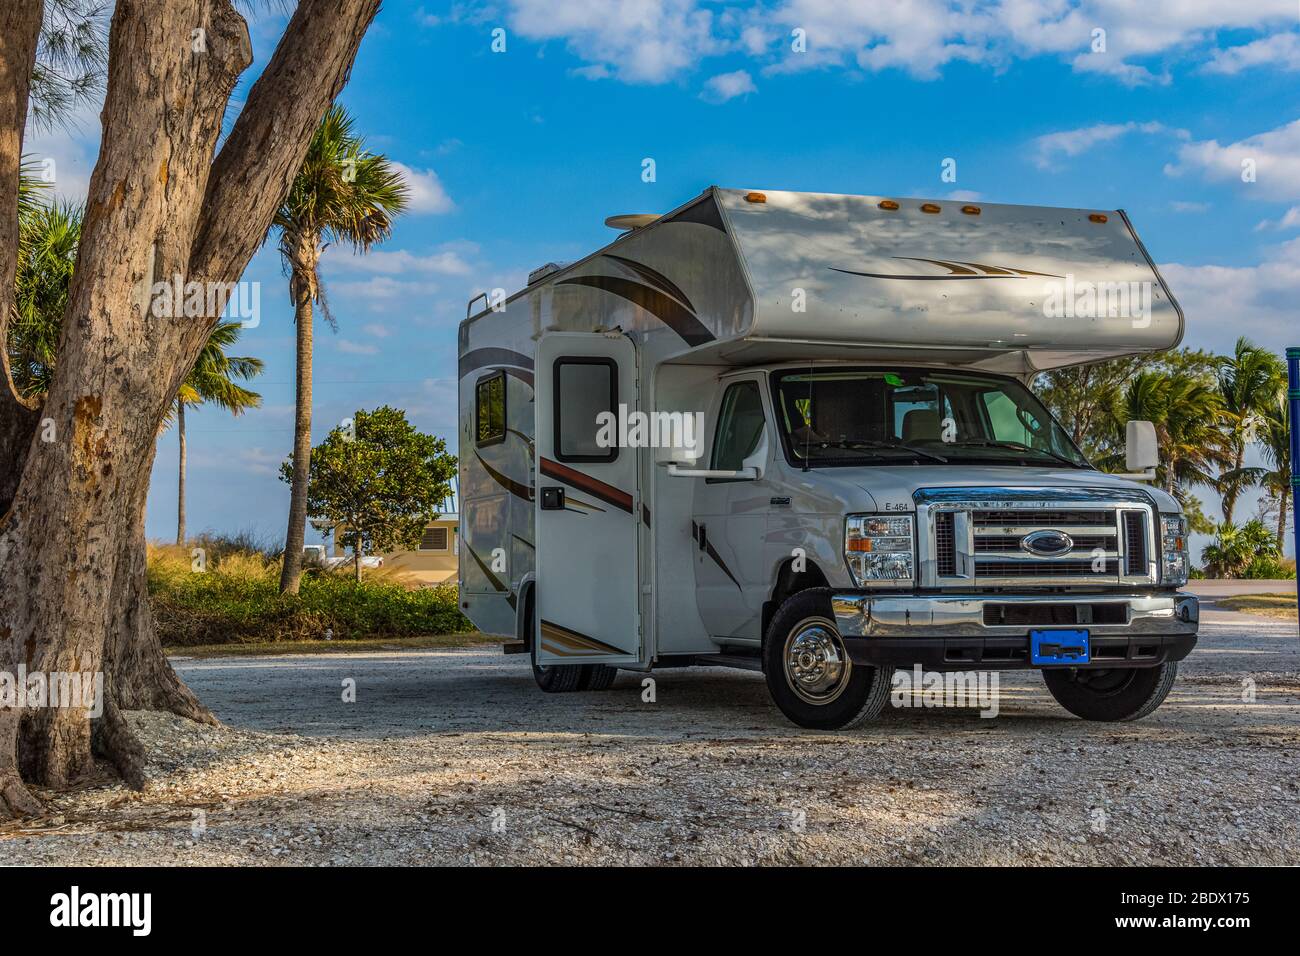 C-type camper standing on a beach in the sand Stock Photo